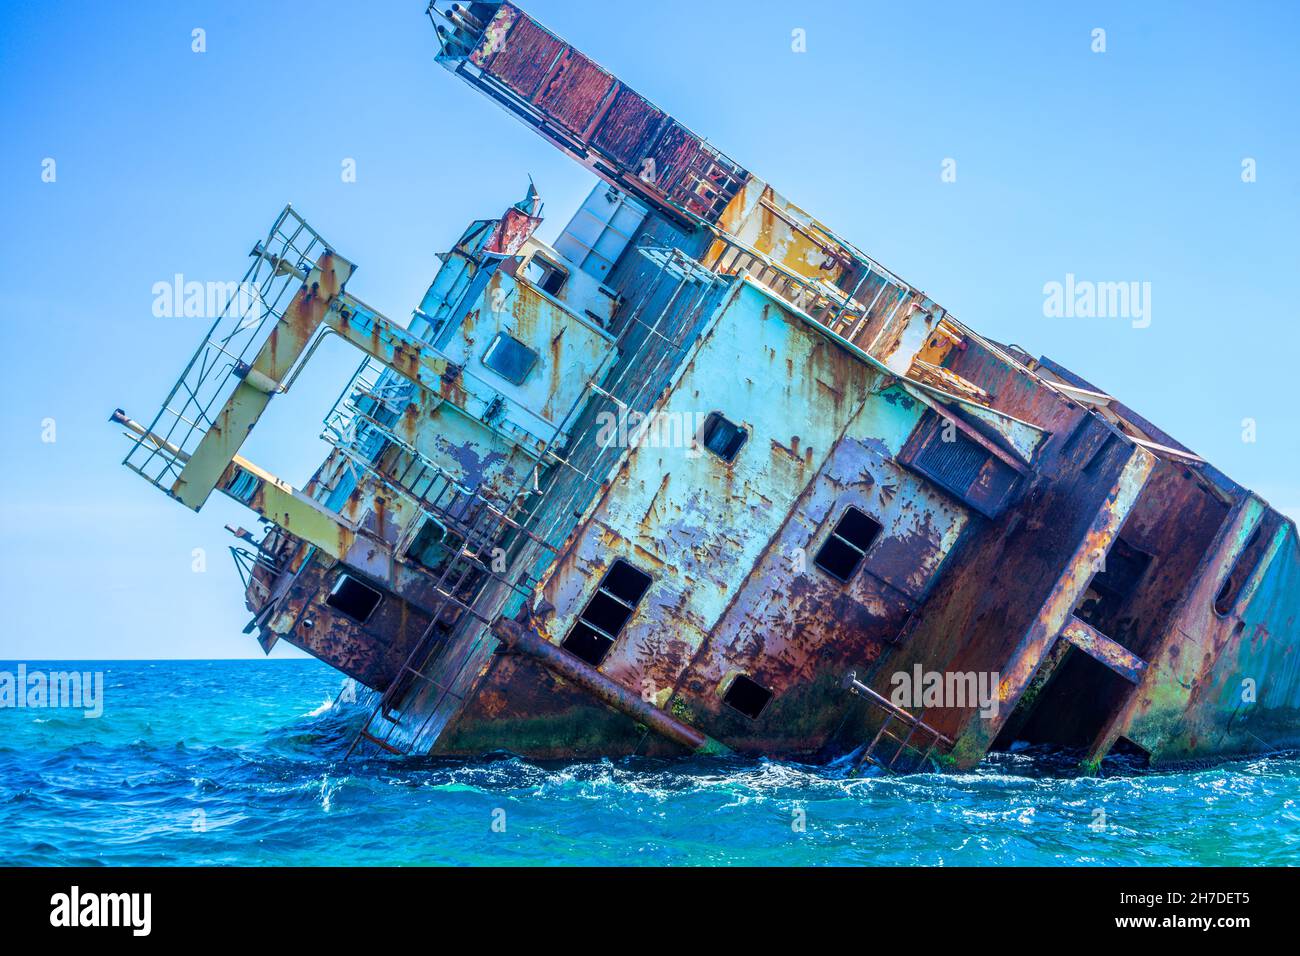 Part of the wreck sticking out of the water off the coast of Tarkhankut, Crimea Stock Photo